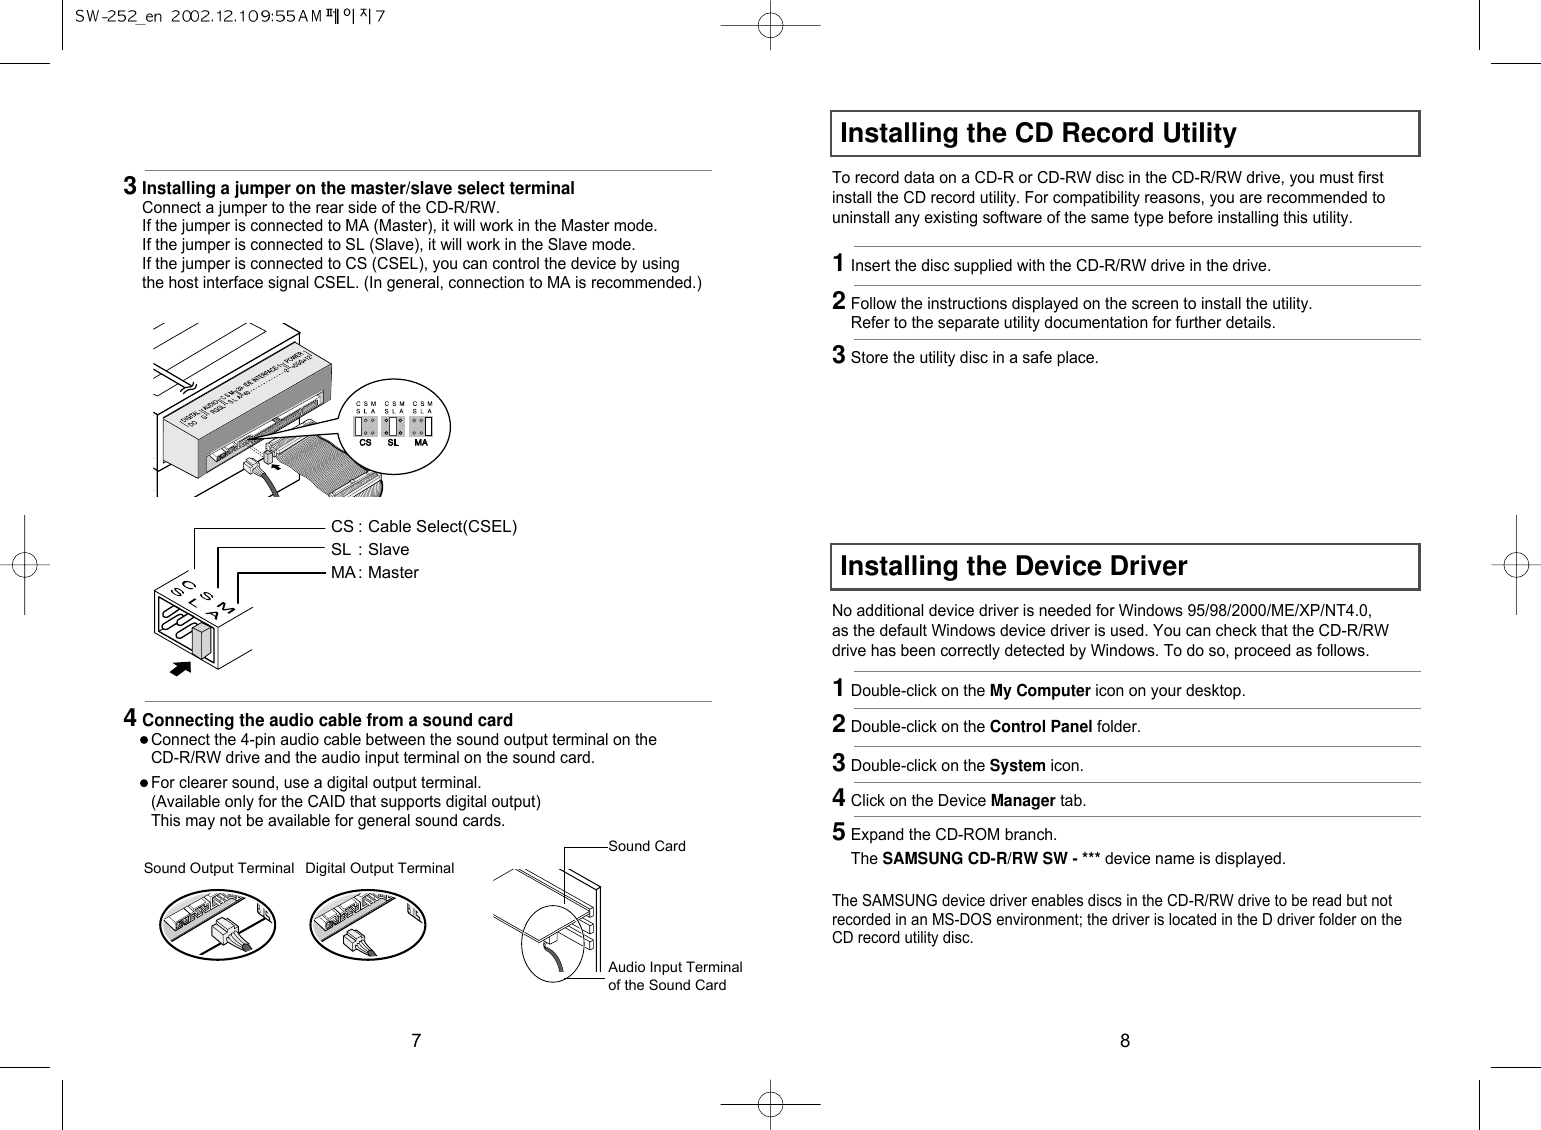 8Installing the CD Record UtilityInstalling the Device DriverTo record data on a CD-R or CD-RW disc in the CD-R/RW drive, you must firstinstall the CD record utility. For compatibility reasons, you are recommended touninstall any existing software of the same type before installing this utility.No additional device driver is needed for Windows 95/98/2000/ME/XP/NT4.0,as the default Windows device driver is used. You can check that the CD-R/RWdrive has been correctly detected by Windows. To do so, proceed as follows.The SAMSUNG device driver enables discs in the CD-R/RW drive to be read but notrecorded in an MS-DOS environment; the driver is located in the D driver folder on theCD record utility disc.1Insert the disc supplied with the CD-R/RW drive in the drive.1Double-click on the My Computer icon on your desktop.2Double-click on the Control Panel folder.3Double-click on the System icon.4Click on the Device Manager tab.5Expand the CD-ROM branch.The SAMSUNG CD-R/RW SW - *** device name is displayed.2Follow the instructions displayed on the screen to install the utility.Refer to the separate utility documentation for further details.3Store the utility disc in a safe place.73Installing a jumper on the master/slave select terminalConnect a jumper to the rear side of the CD-R/RW.If the jumper is connected to MA (Master), it will work in the Master mode.If the jumper is connected to SL (Slave), it will work in the Slave mode.If the jumper is connected to CS (CSEL), you can control the device by usingthe host interface signal CSEL. (In general, connection to MA is recommended.)CS : Cable Select(CSEL)SL : SlaveMA : Master4Connecting the audio cable from a sound cardConnect the 4-pin audio cable between the sound output terminal on theCD-R/RW drive and the audio input terminal on the sound card.For clearer sound, use a digital output terminal.(Available only for the CAID that supports digital output)This may not be available for general sound cards.Sound CardSound Output Terminal Digital Output TerminalAudio Input Terminalof the Sound Card